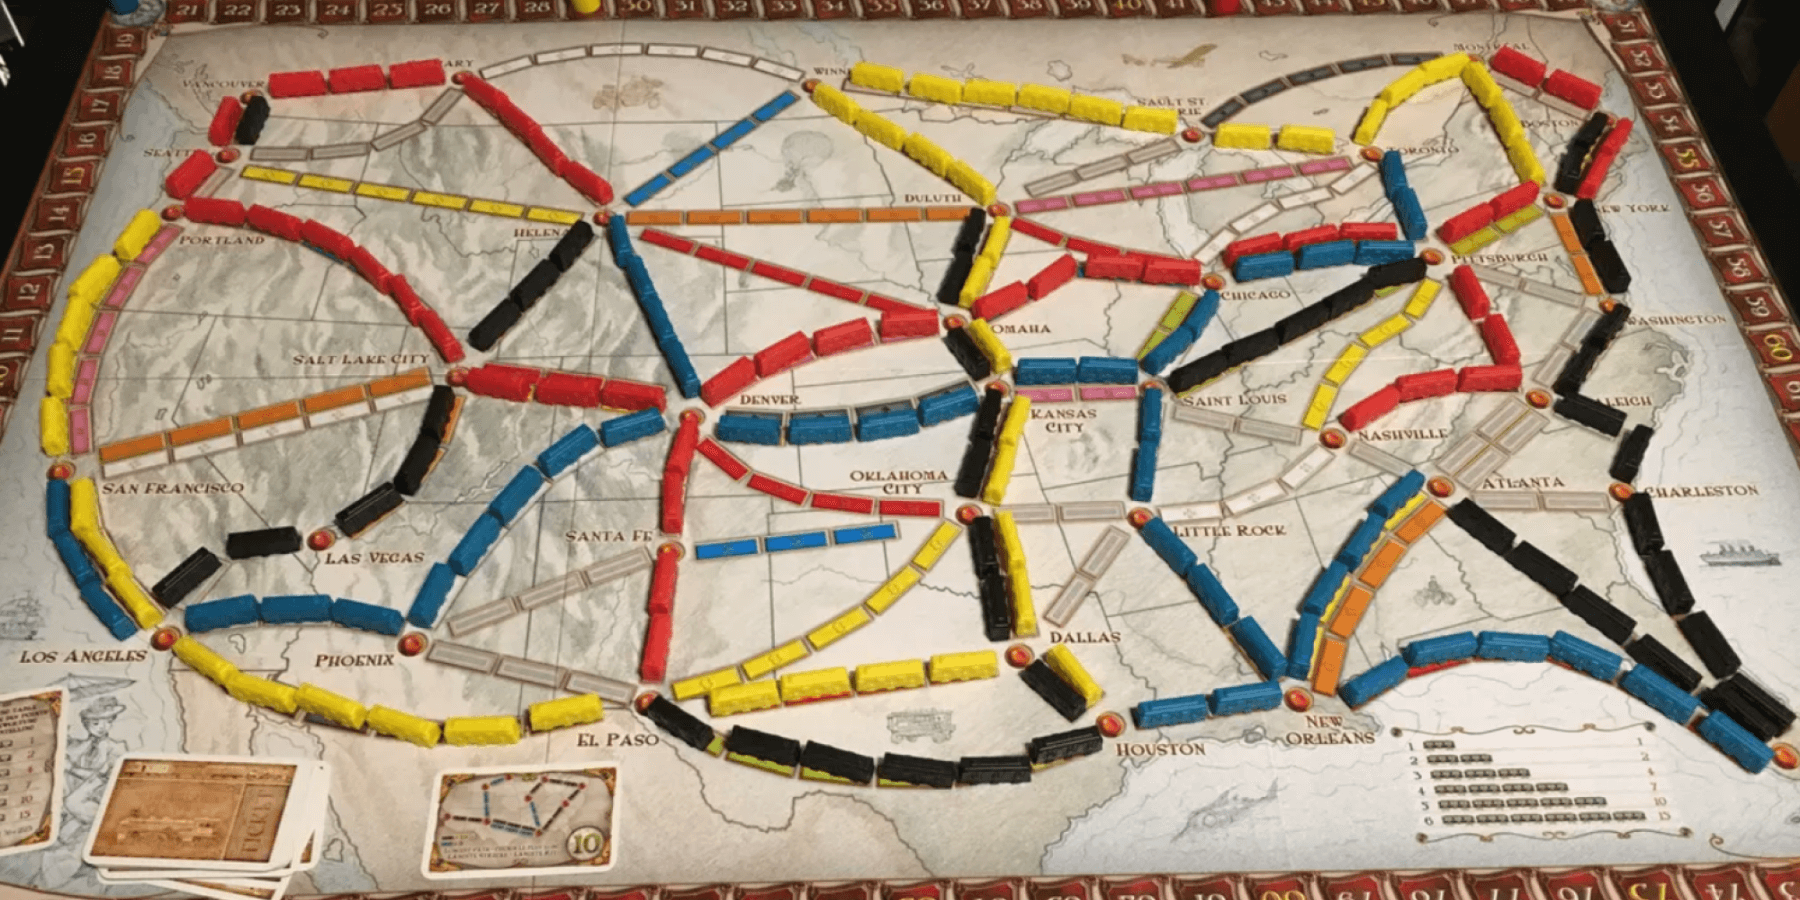 Ticket to Ride board game overview